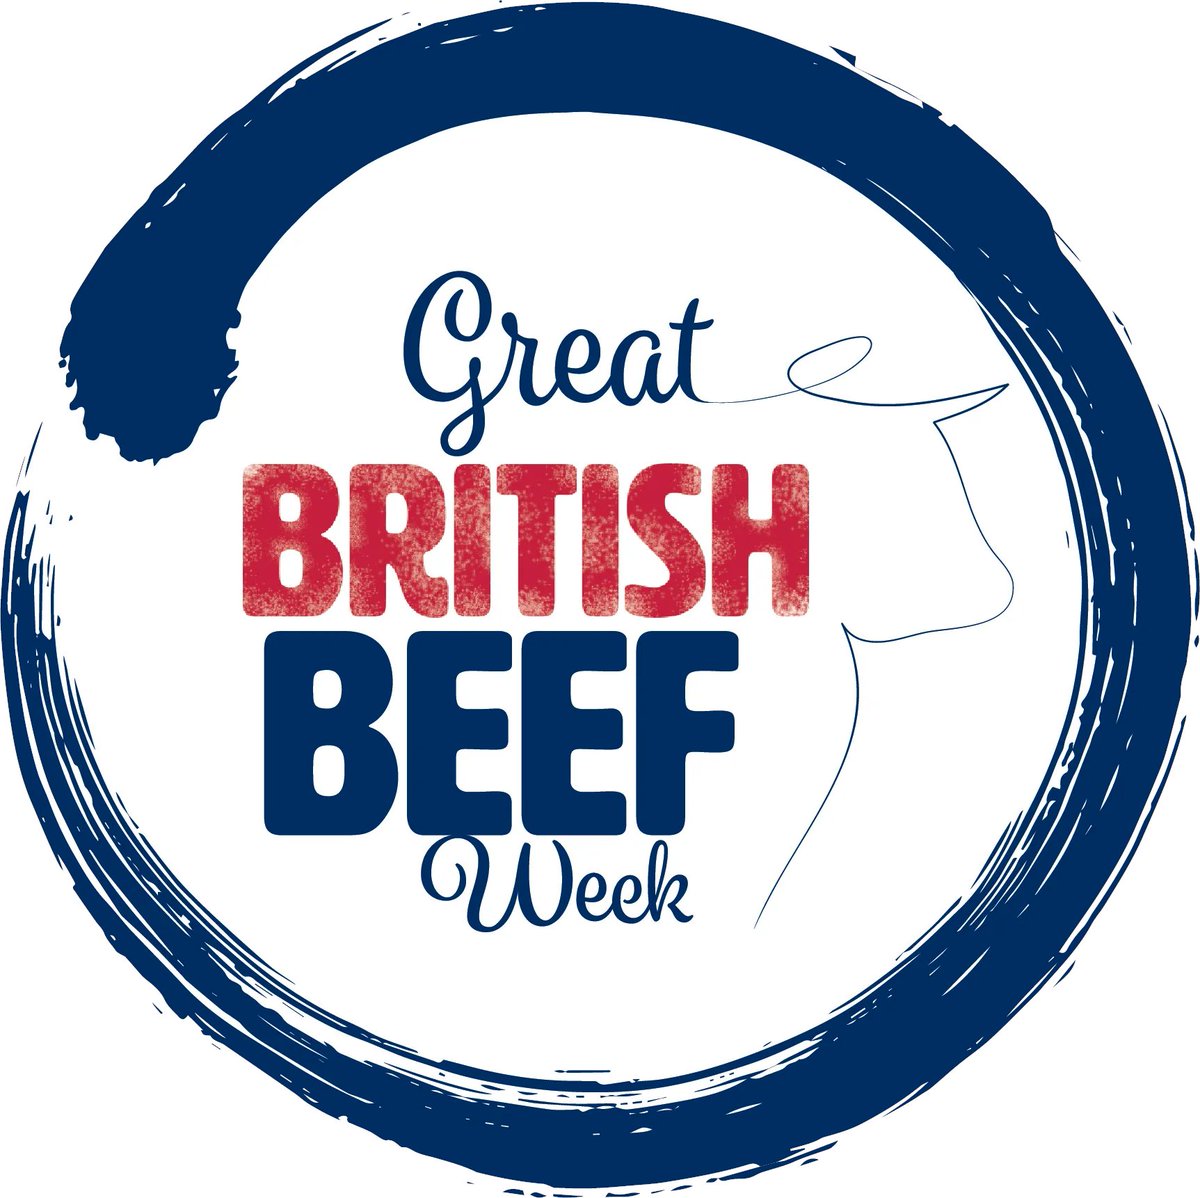 It's still Great British Beef Week. #crackin

Check out our range of magnificent fresh, carefully reared Cornish beef products in our online shop. Simply head to our website. We offer collection from the farm and home delivery options.

#gbbw24 #GreatBritishBeefWeek #britishbeef